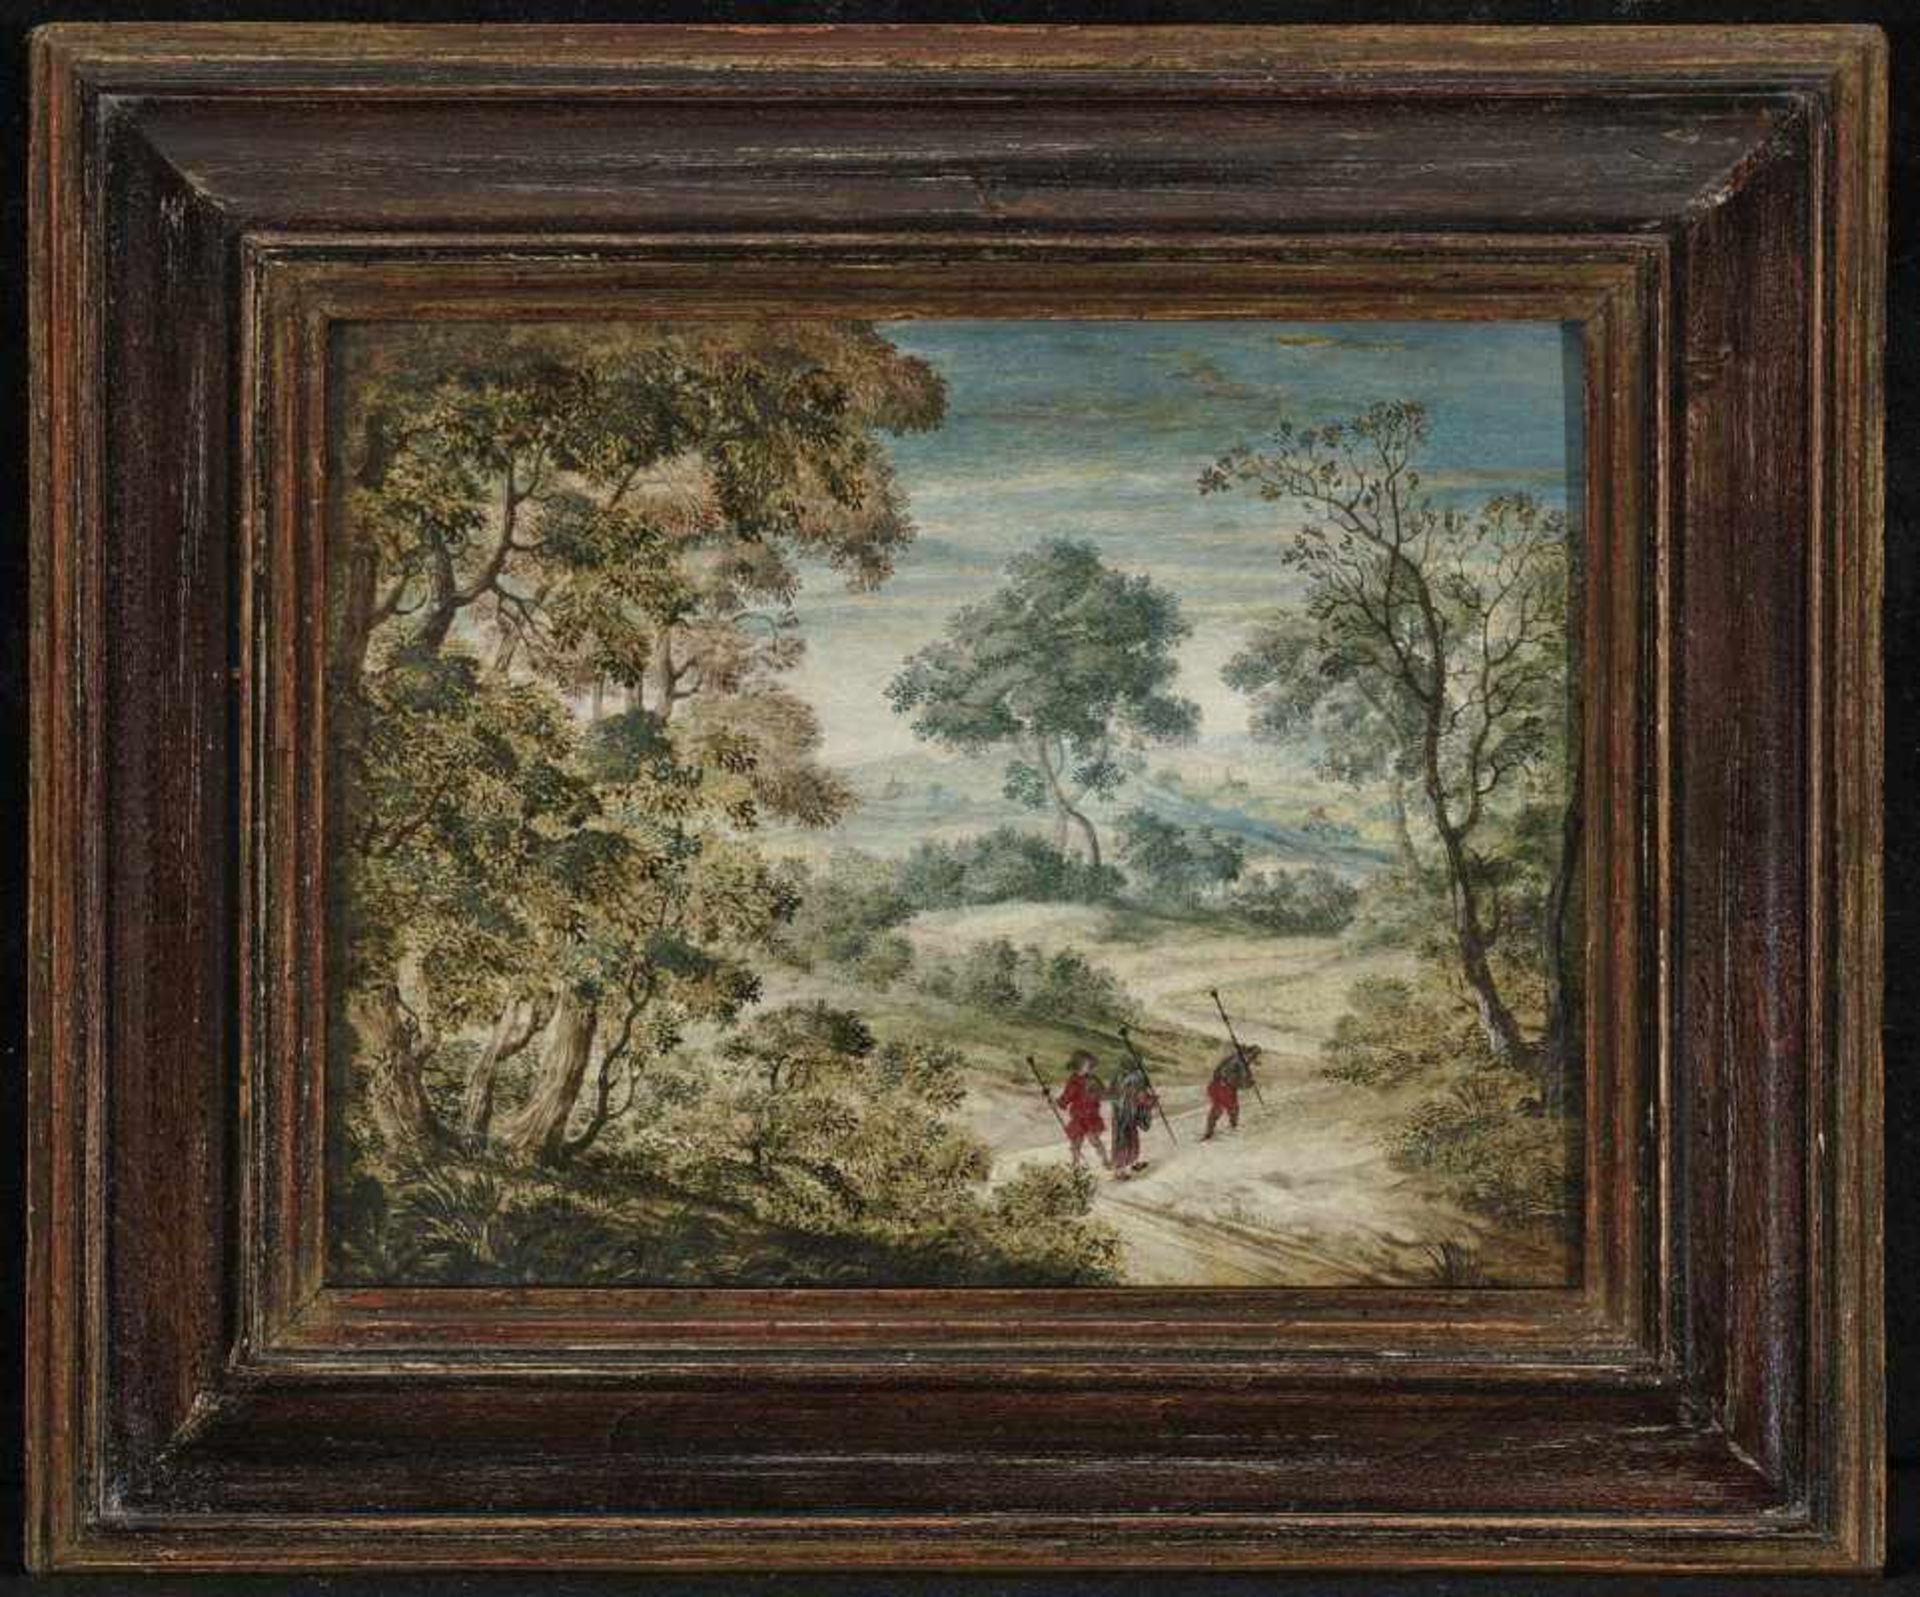 In the style of Coninxloo, Gillis vanExtensive Woodland Landscape with Travellers Gouache on - Bild 2 aus 2